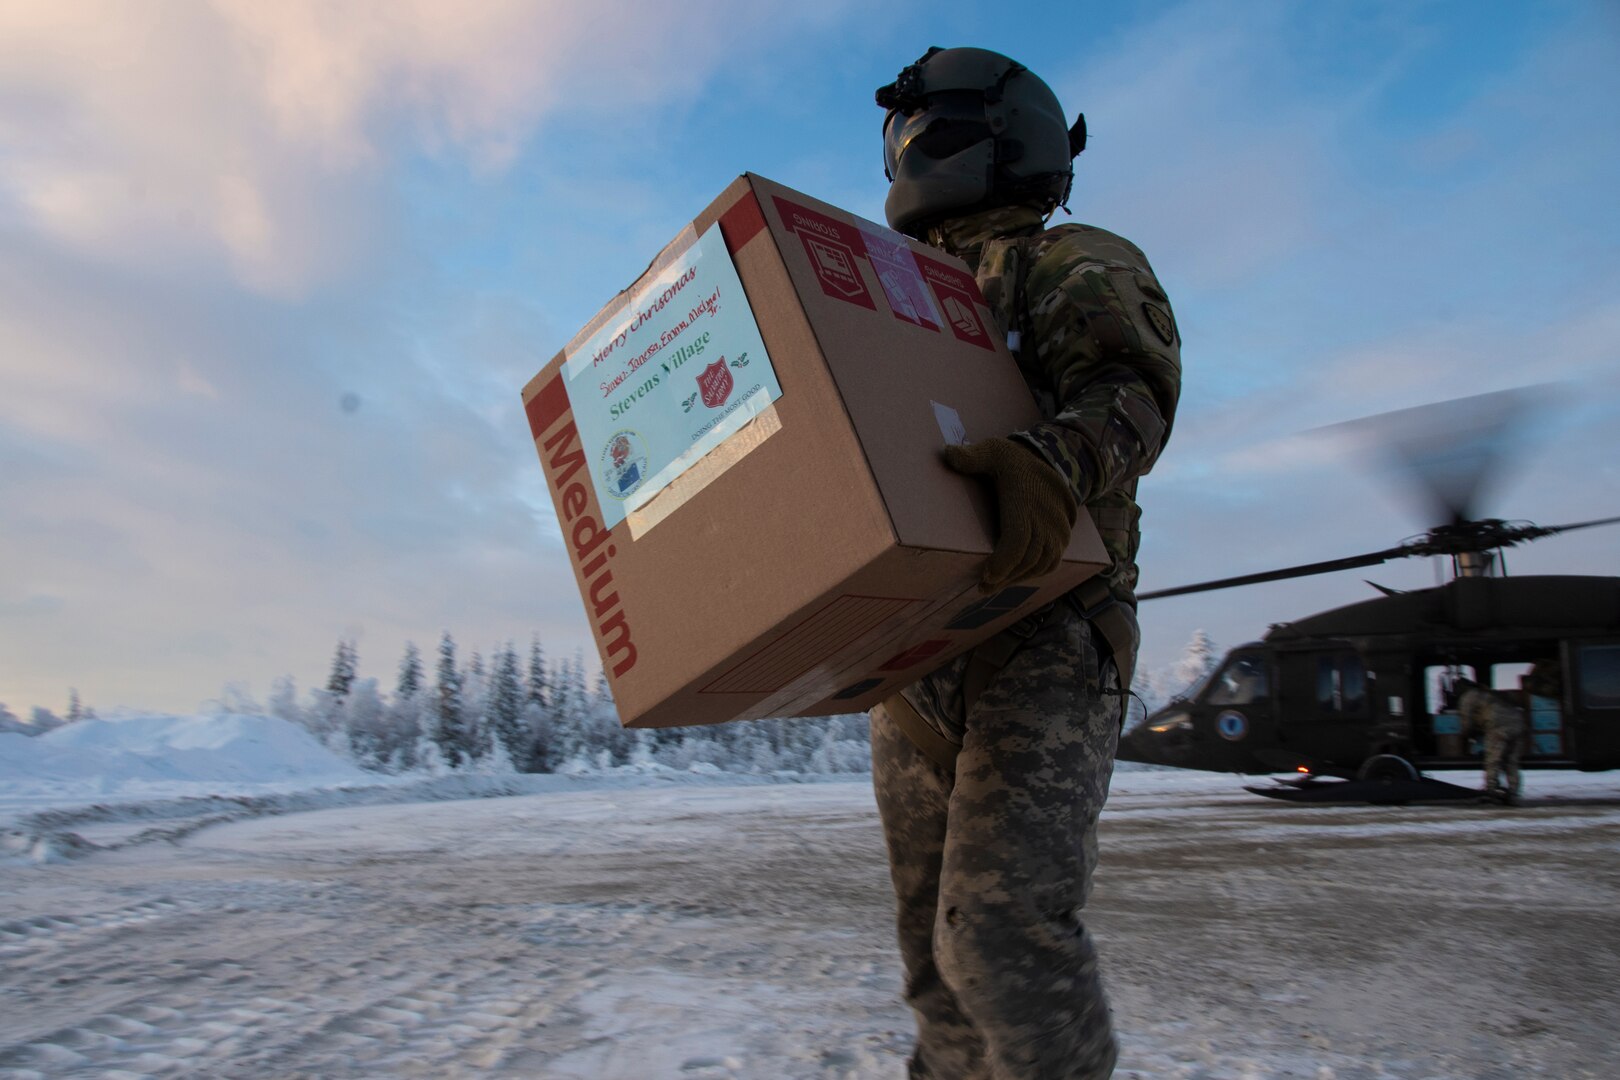 Sgt. Peter Phillip, Alaska National Guard UH-60 Black Hawk crew chief, delivers packages as a part of the 65th annual tradition of Operation Santa Claus. This year, the Alaska National Guard brought gifts and supplies for people in the remote Alaskan villages of Stevens Village, Birch Creek and Nanwalek.